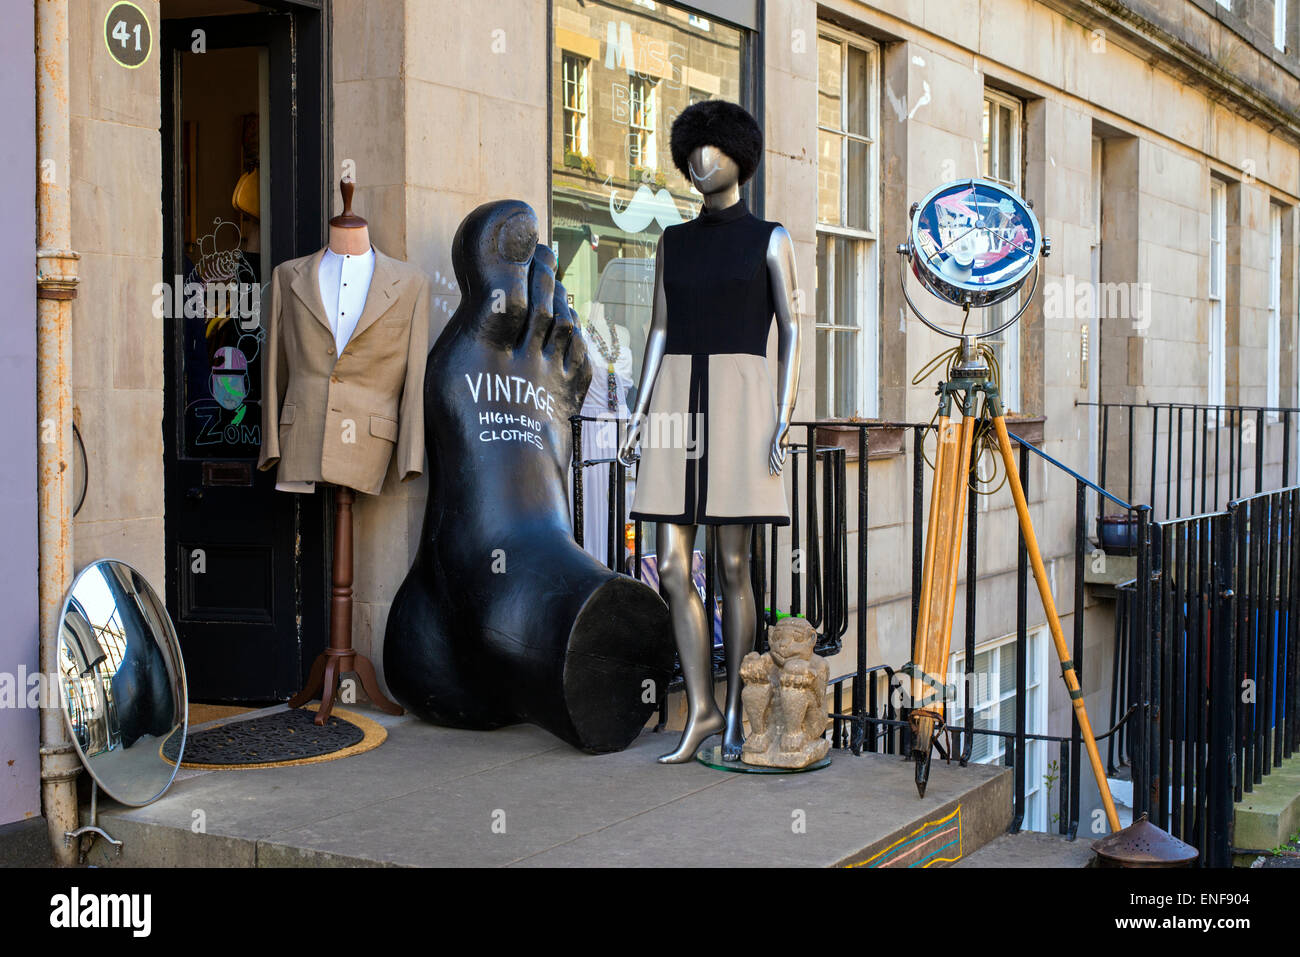 An eclectic display of vintage fashion and objects outside a vintage clothes shop on St Stephen Street, Edinburgh, Scotland, UK. Stock Photo